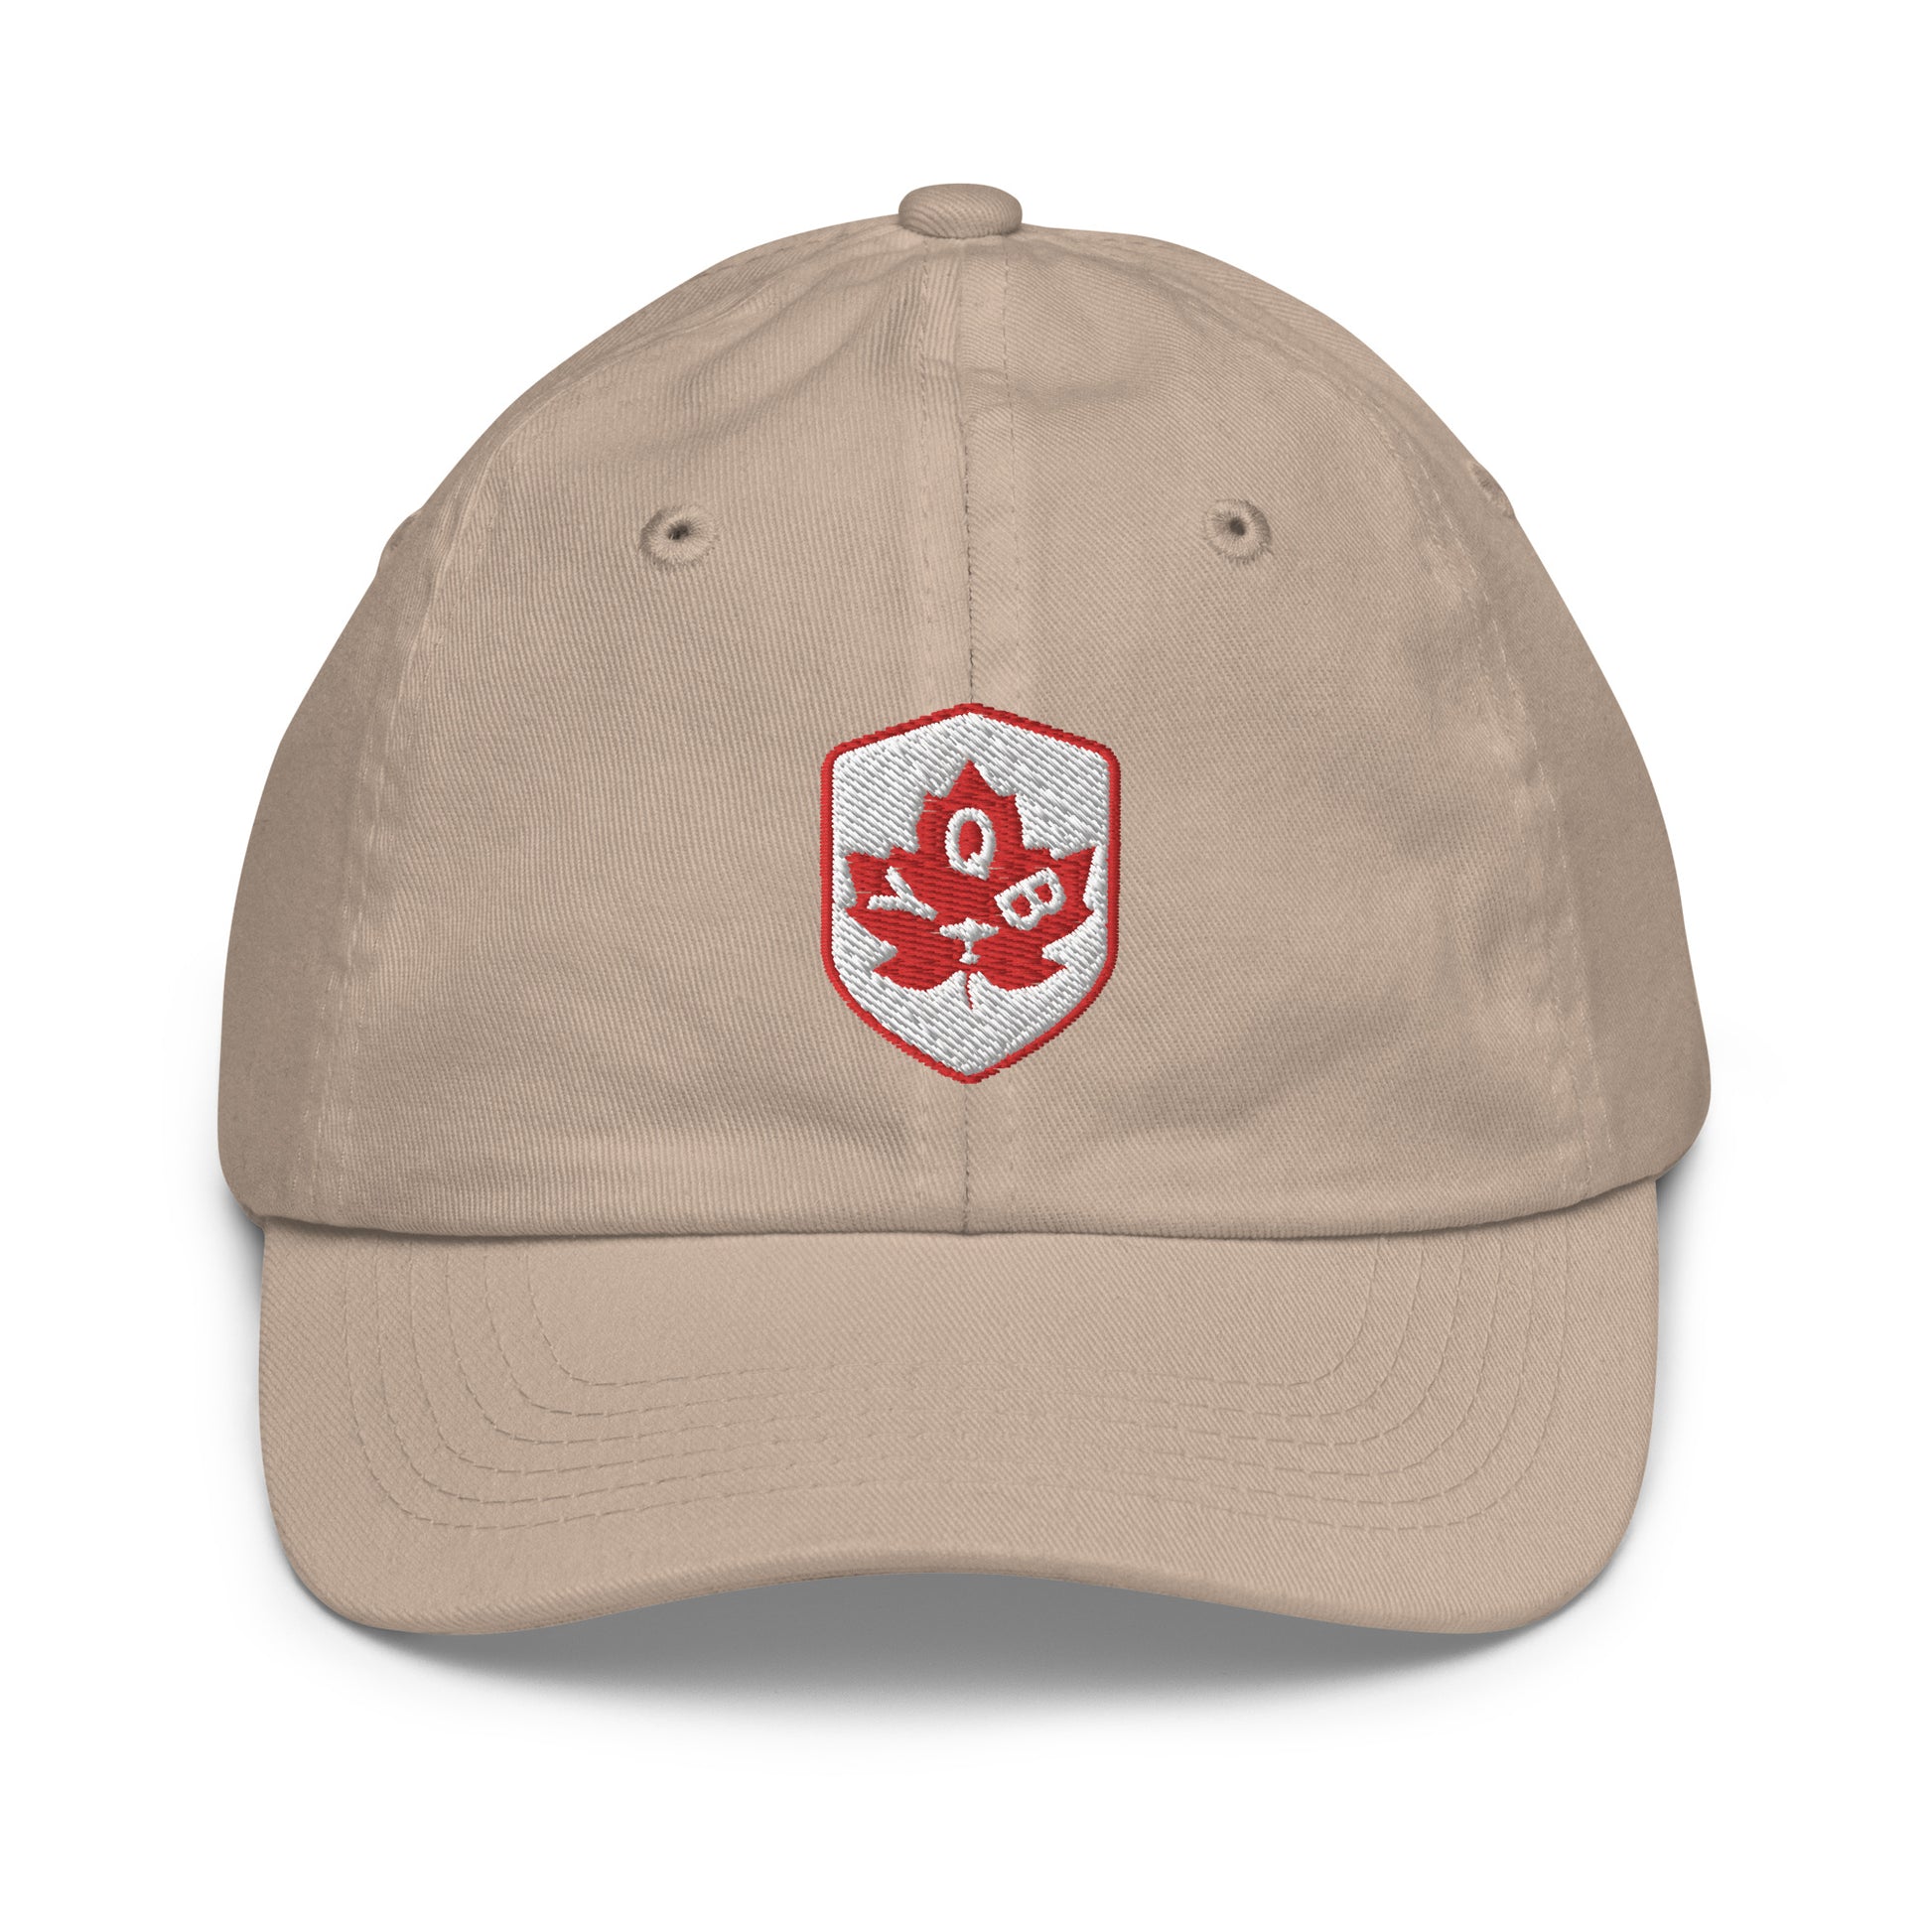 Maple Leaf Kid's Cap - Red/White • YQB Quebec City • YHM Designs - Image 02